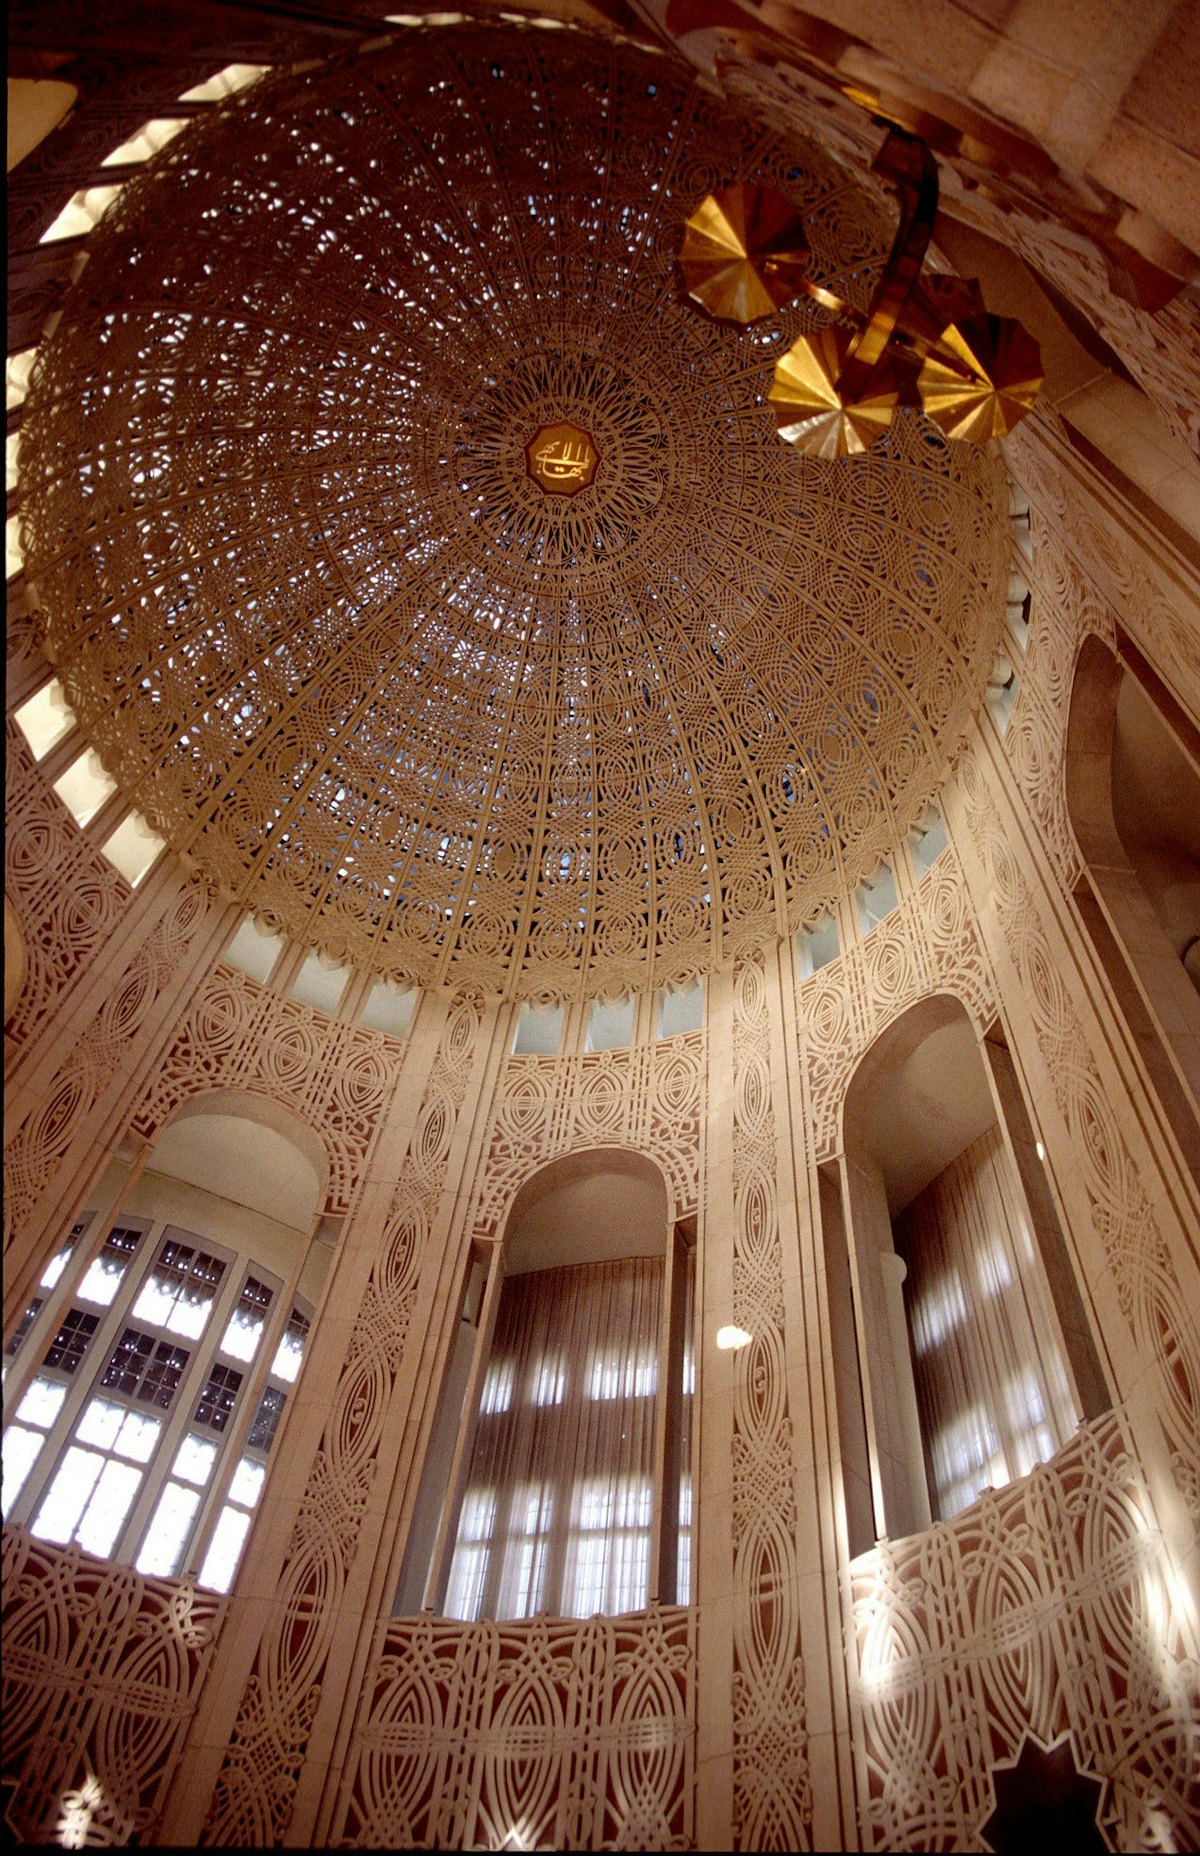 Baha'i House of Worship in Wilmette, near Chicago, United States of America.| From a photographic exhibition by Francisco Gonzalez, entitled "Architects of Unity".